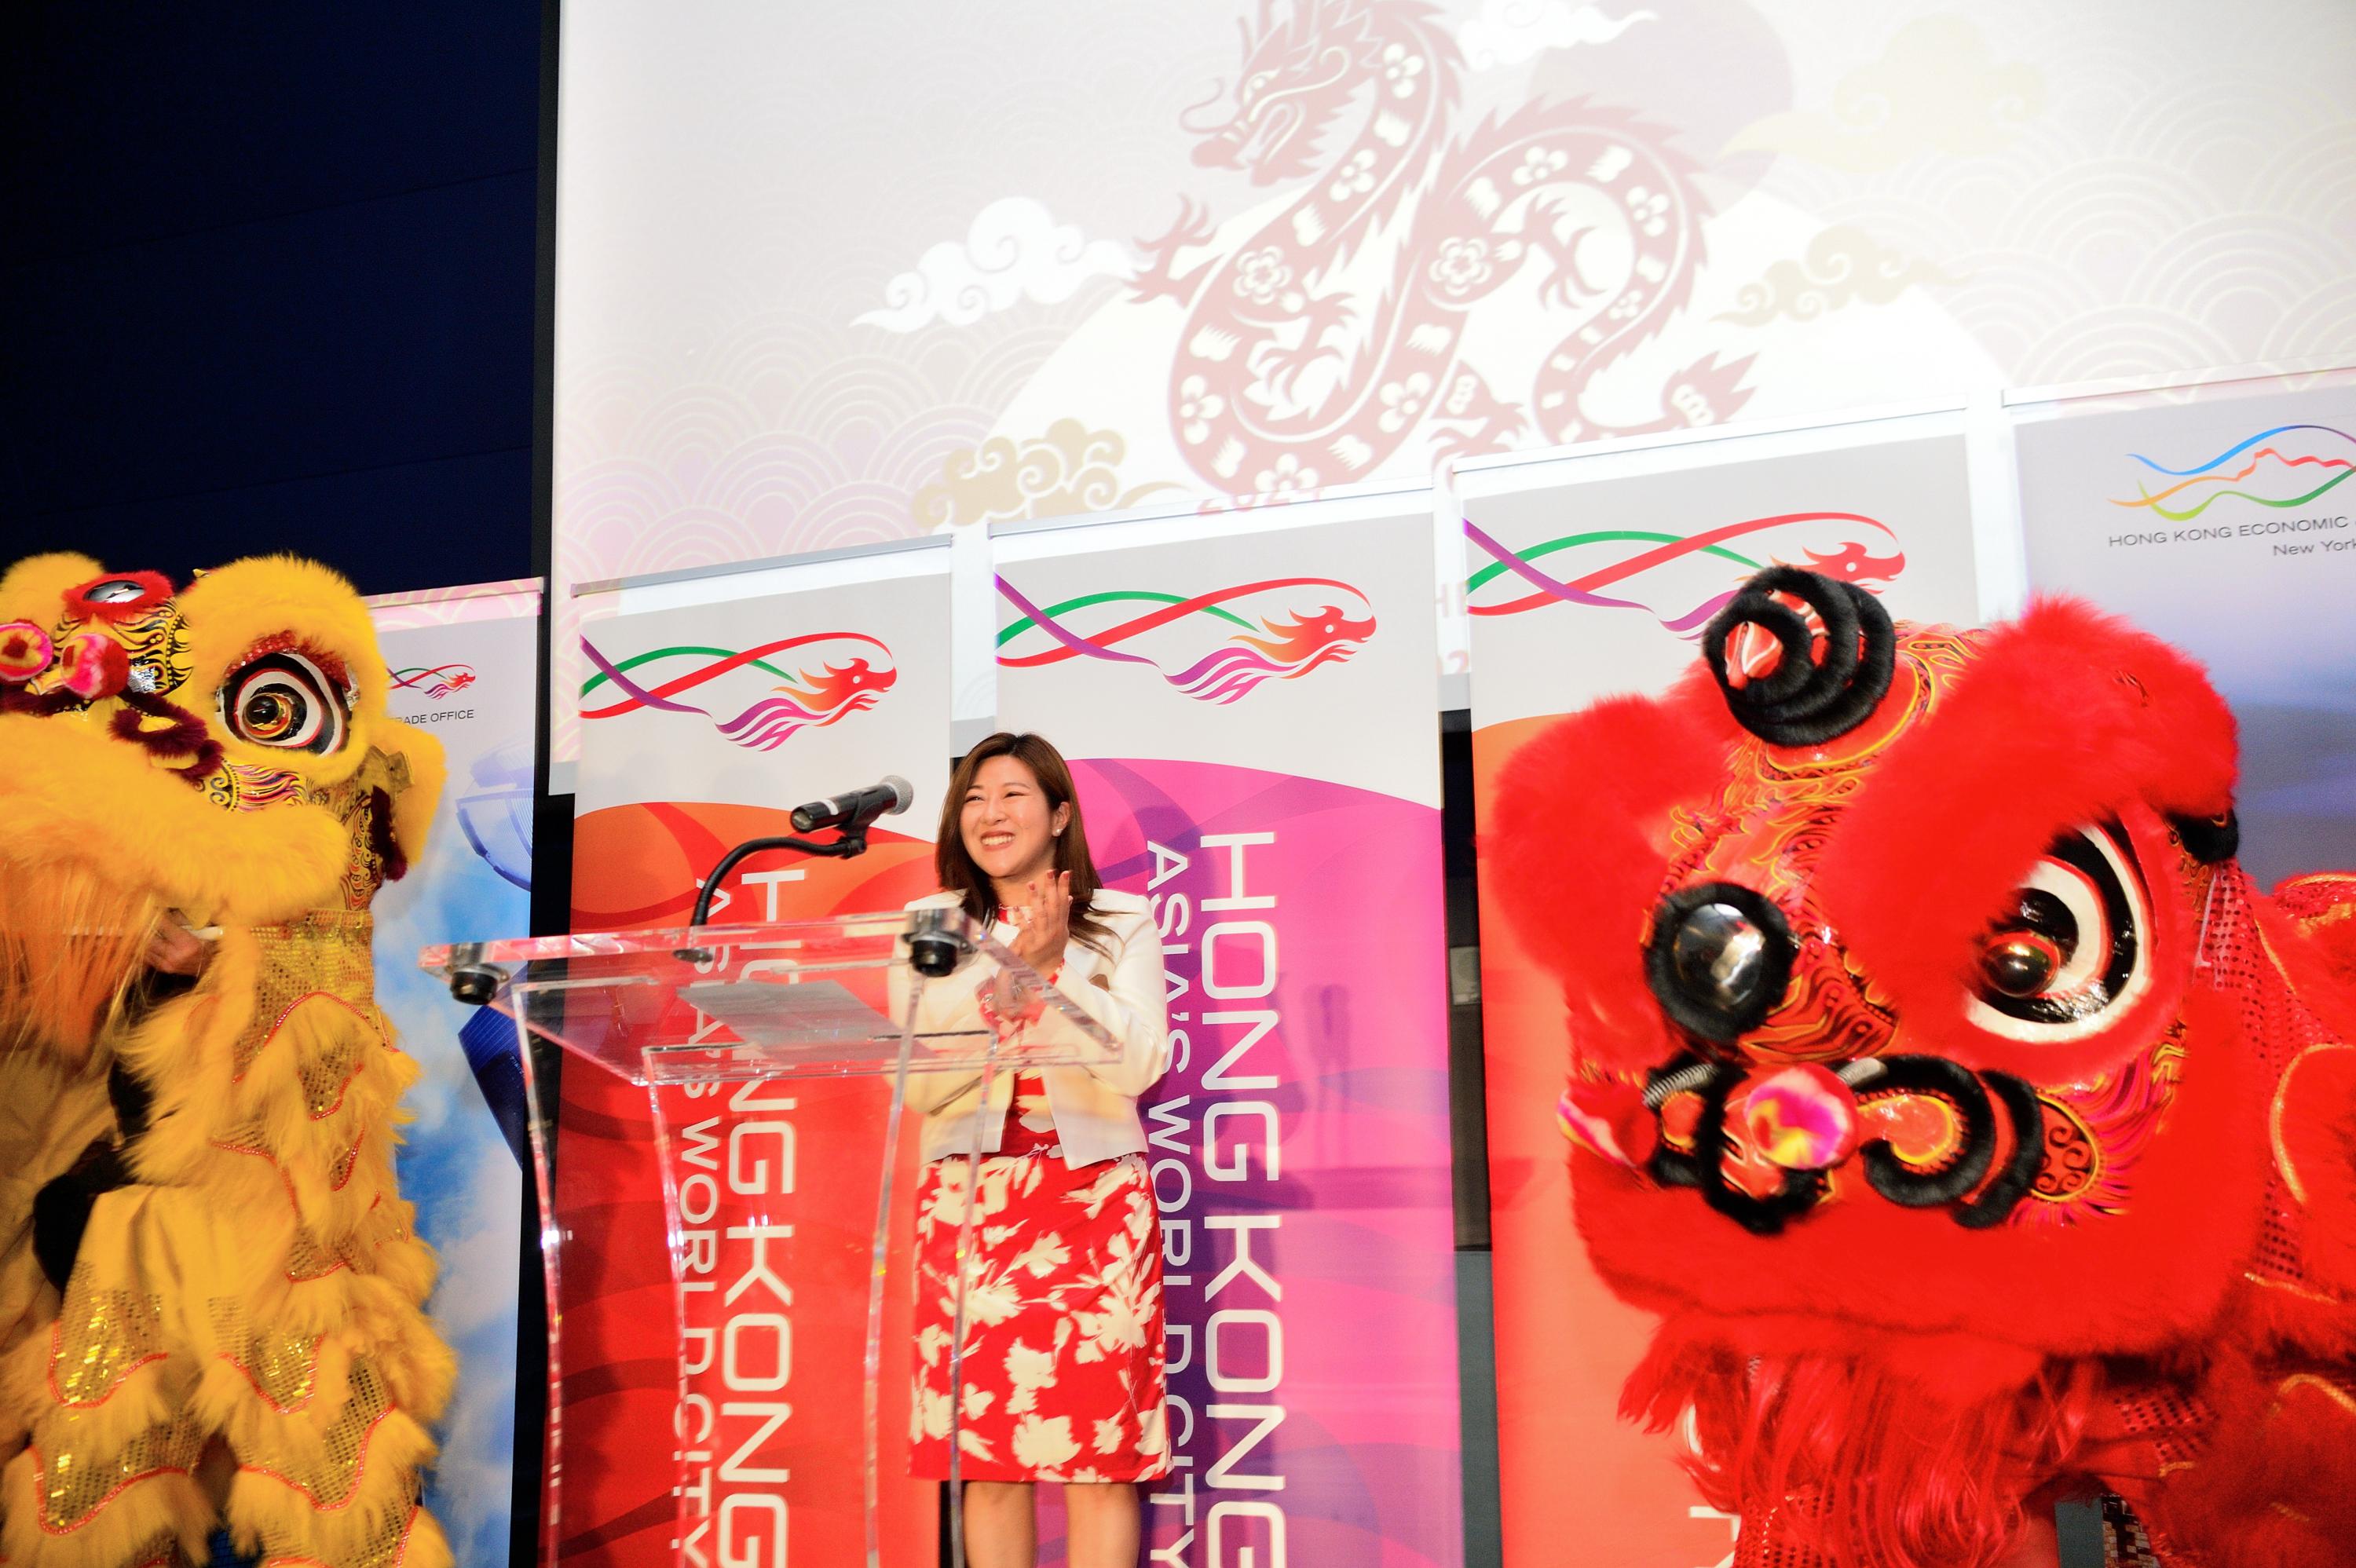 The Director of the Hong Kong Economic and Trade Office, New York, Ms Maisie Ho, promoted Hong Kong's fintech and innovation and technology during her three-day duty visit in Atlanta, Georgia from February 21 to 23 (Atlanta time). Photo shows the spring reception held at Georgia Aquarium in the evening of February 21 for some 200 guests from the city's political, business and finance, as well as academic communities.